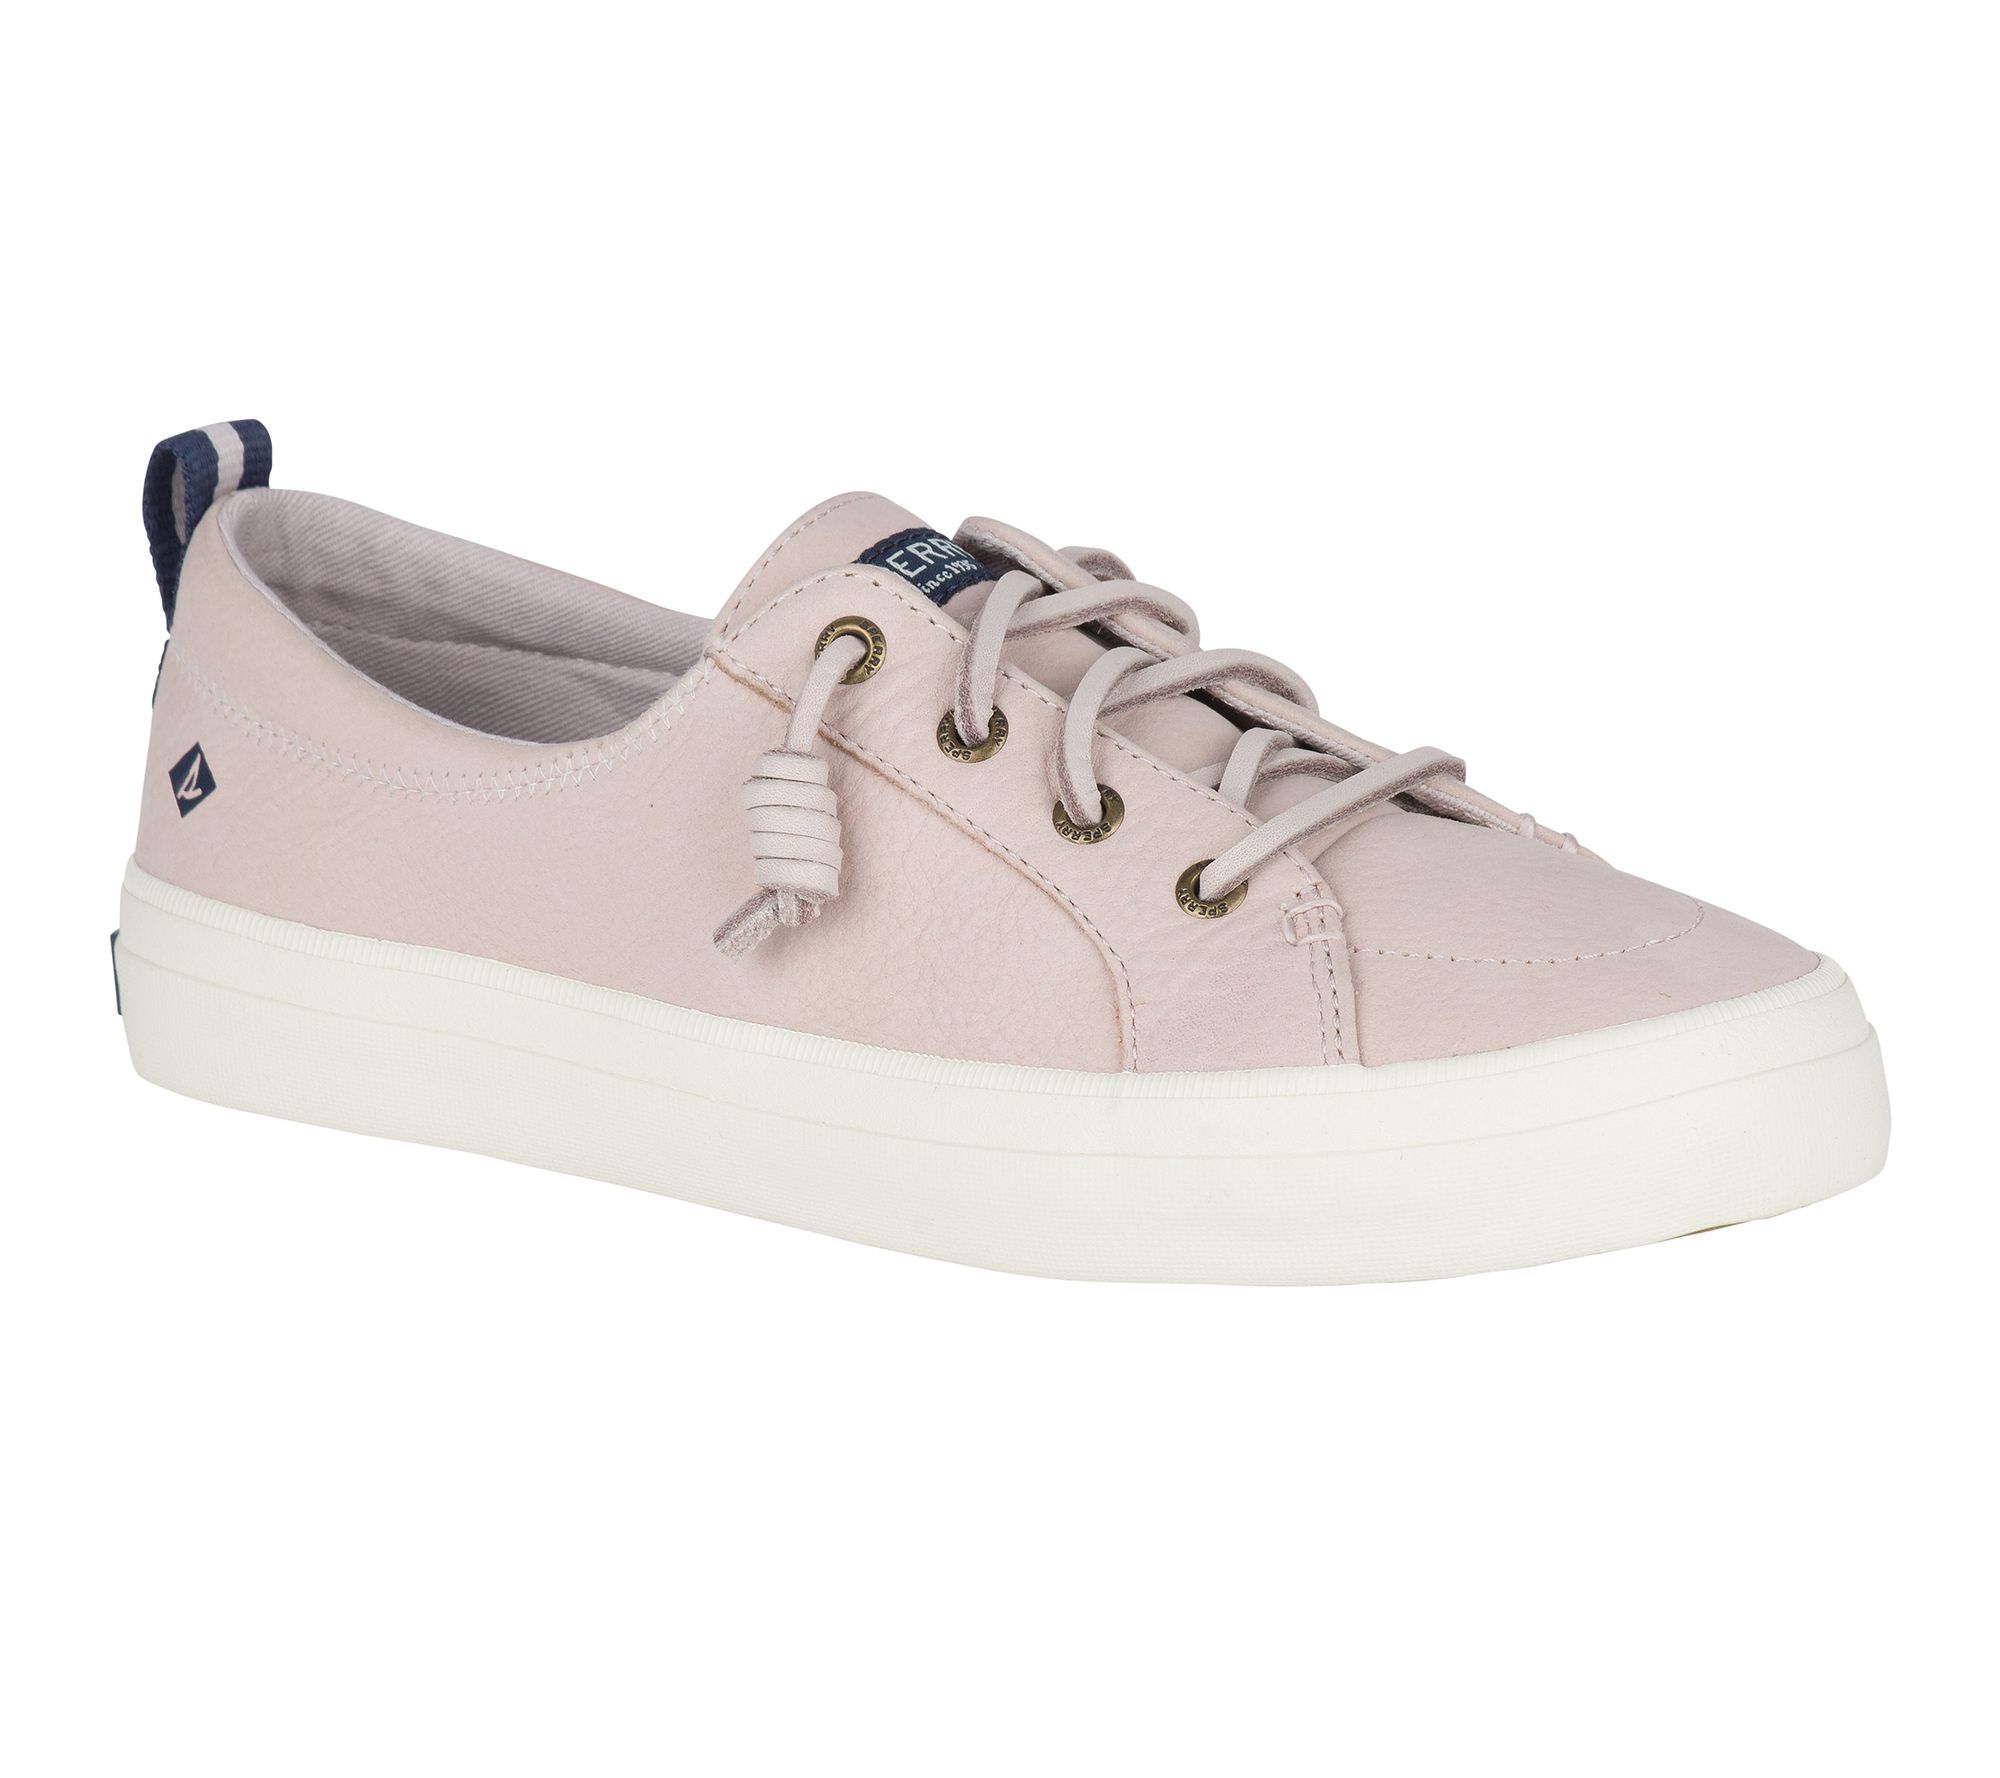 Sperry Crest Vibe Washable Leather Slip 